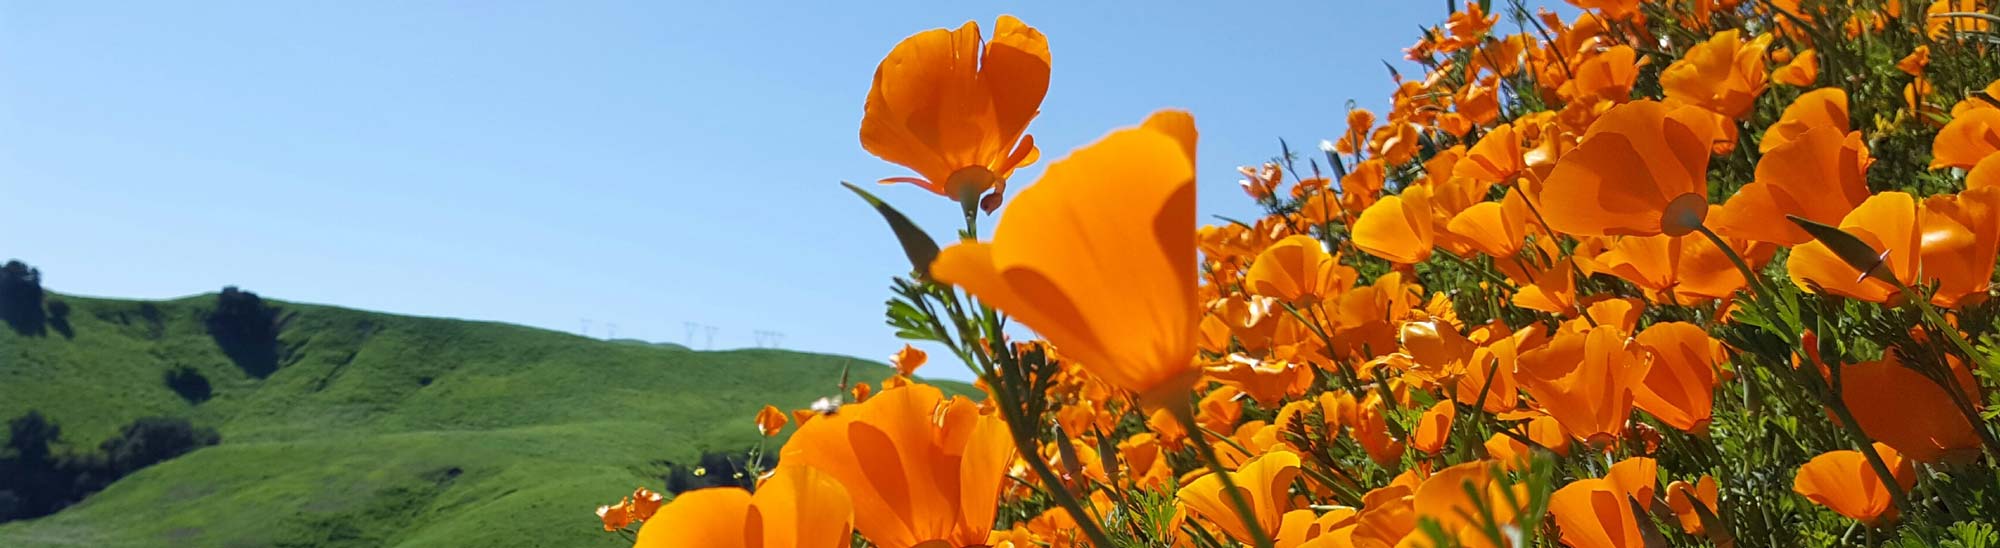 California poppies in a field with hills